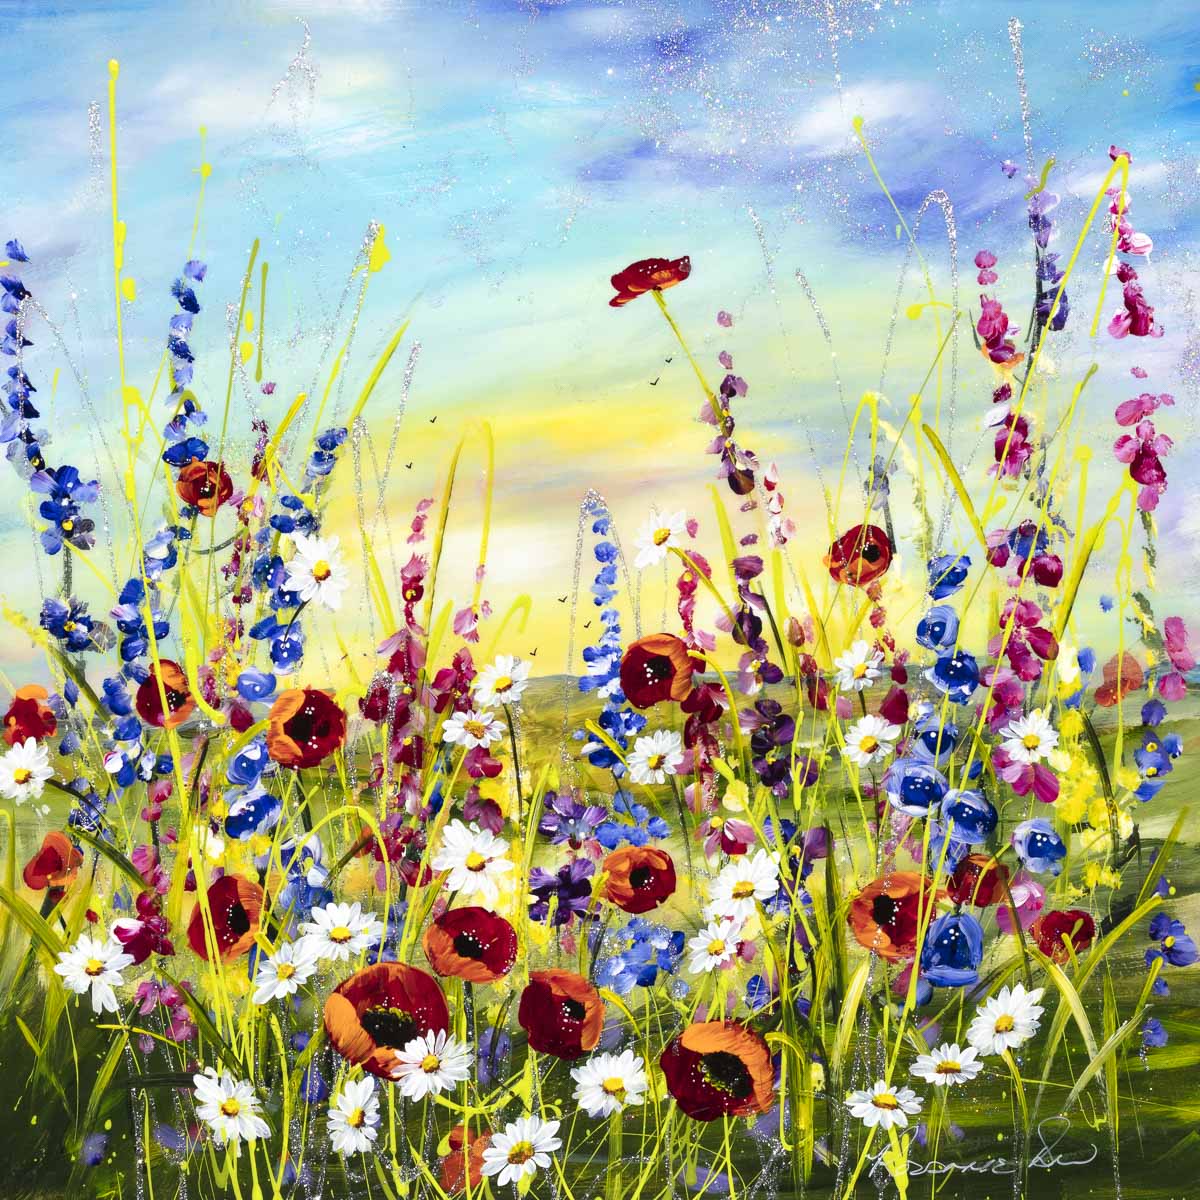 Floral Meadow - Original Rozanne Bell Framed